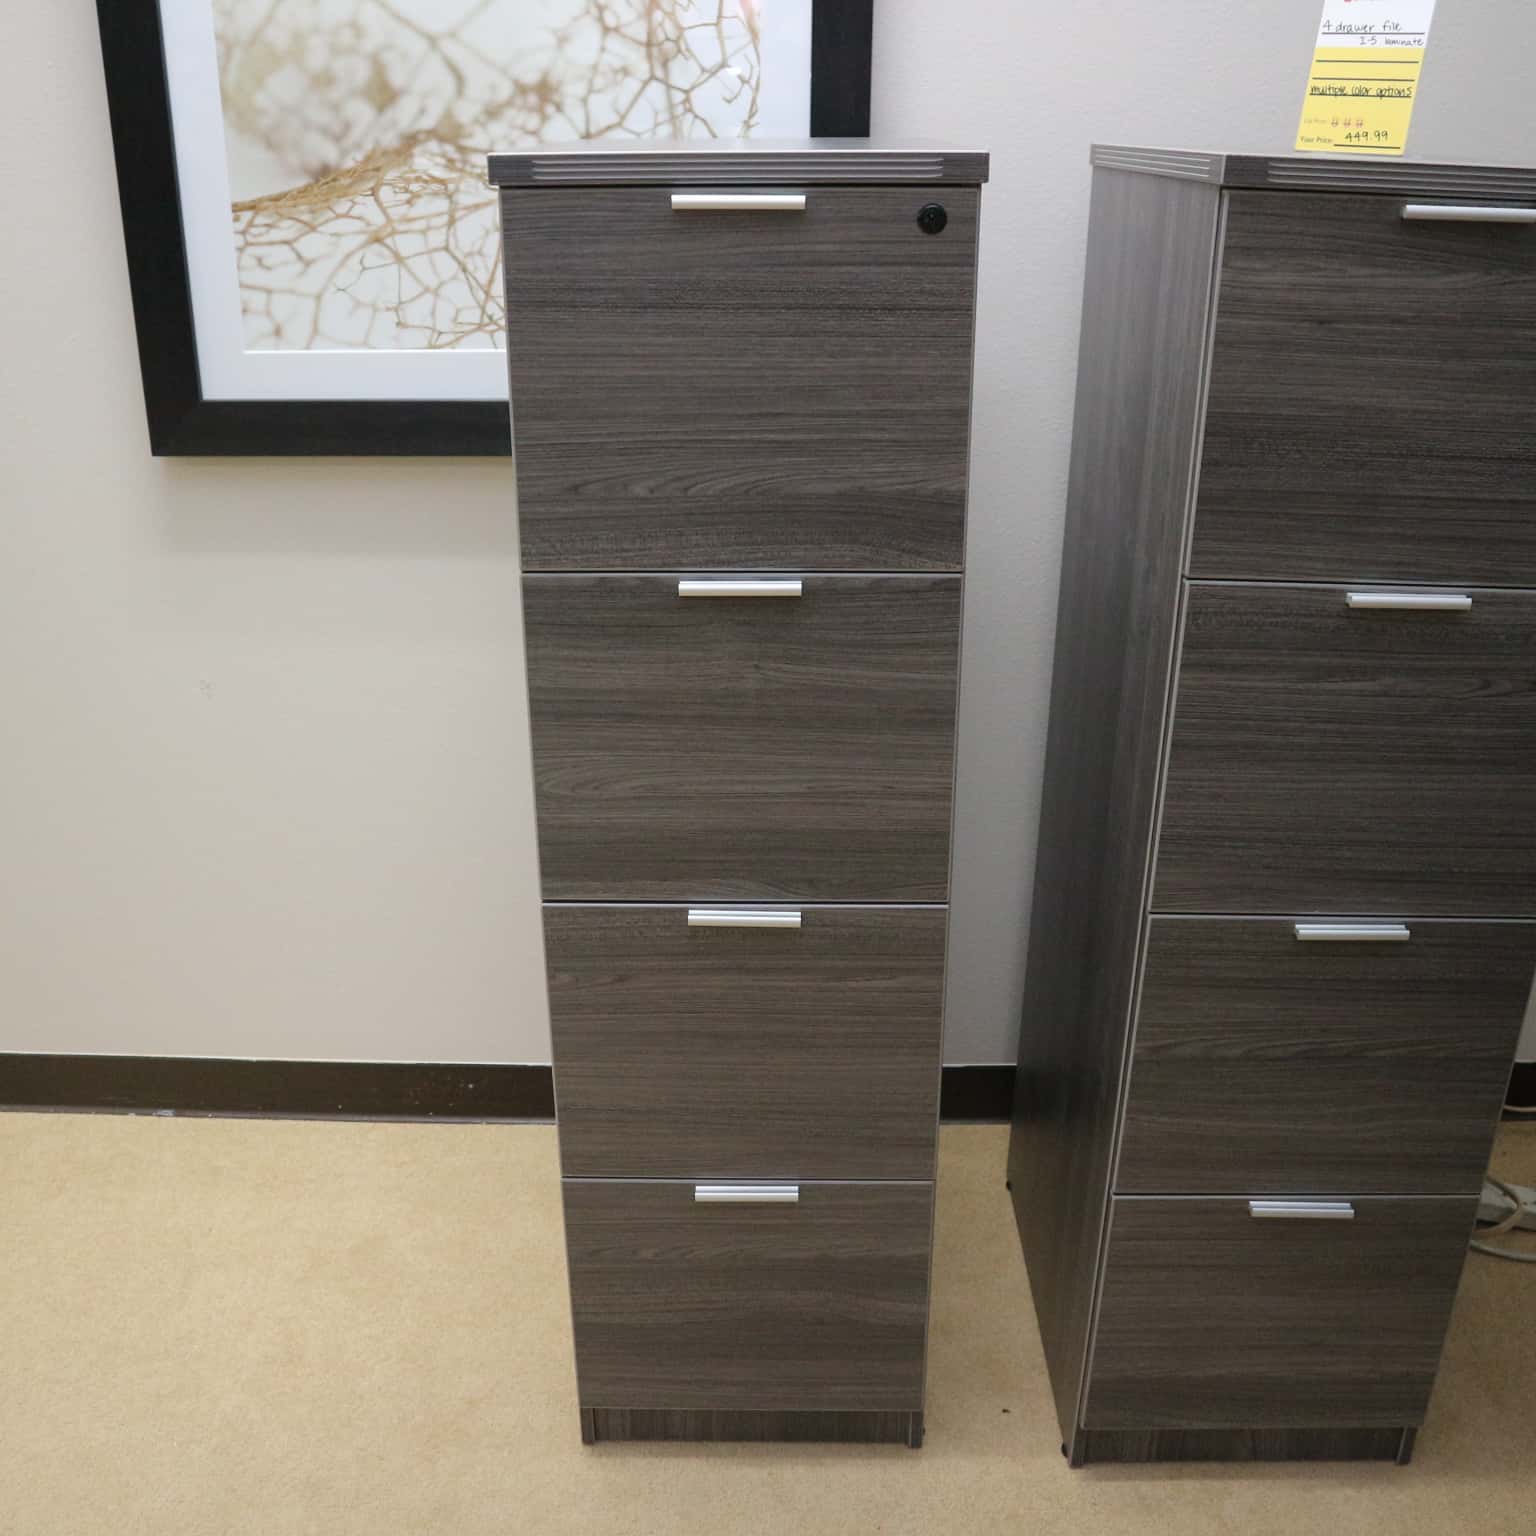 4 Drawer File, laminate, straight pulls and fluted edging